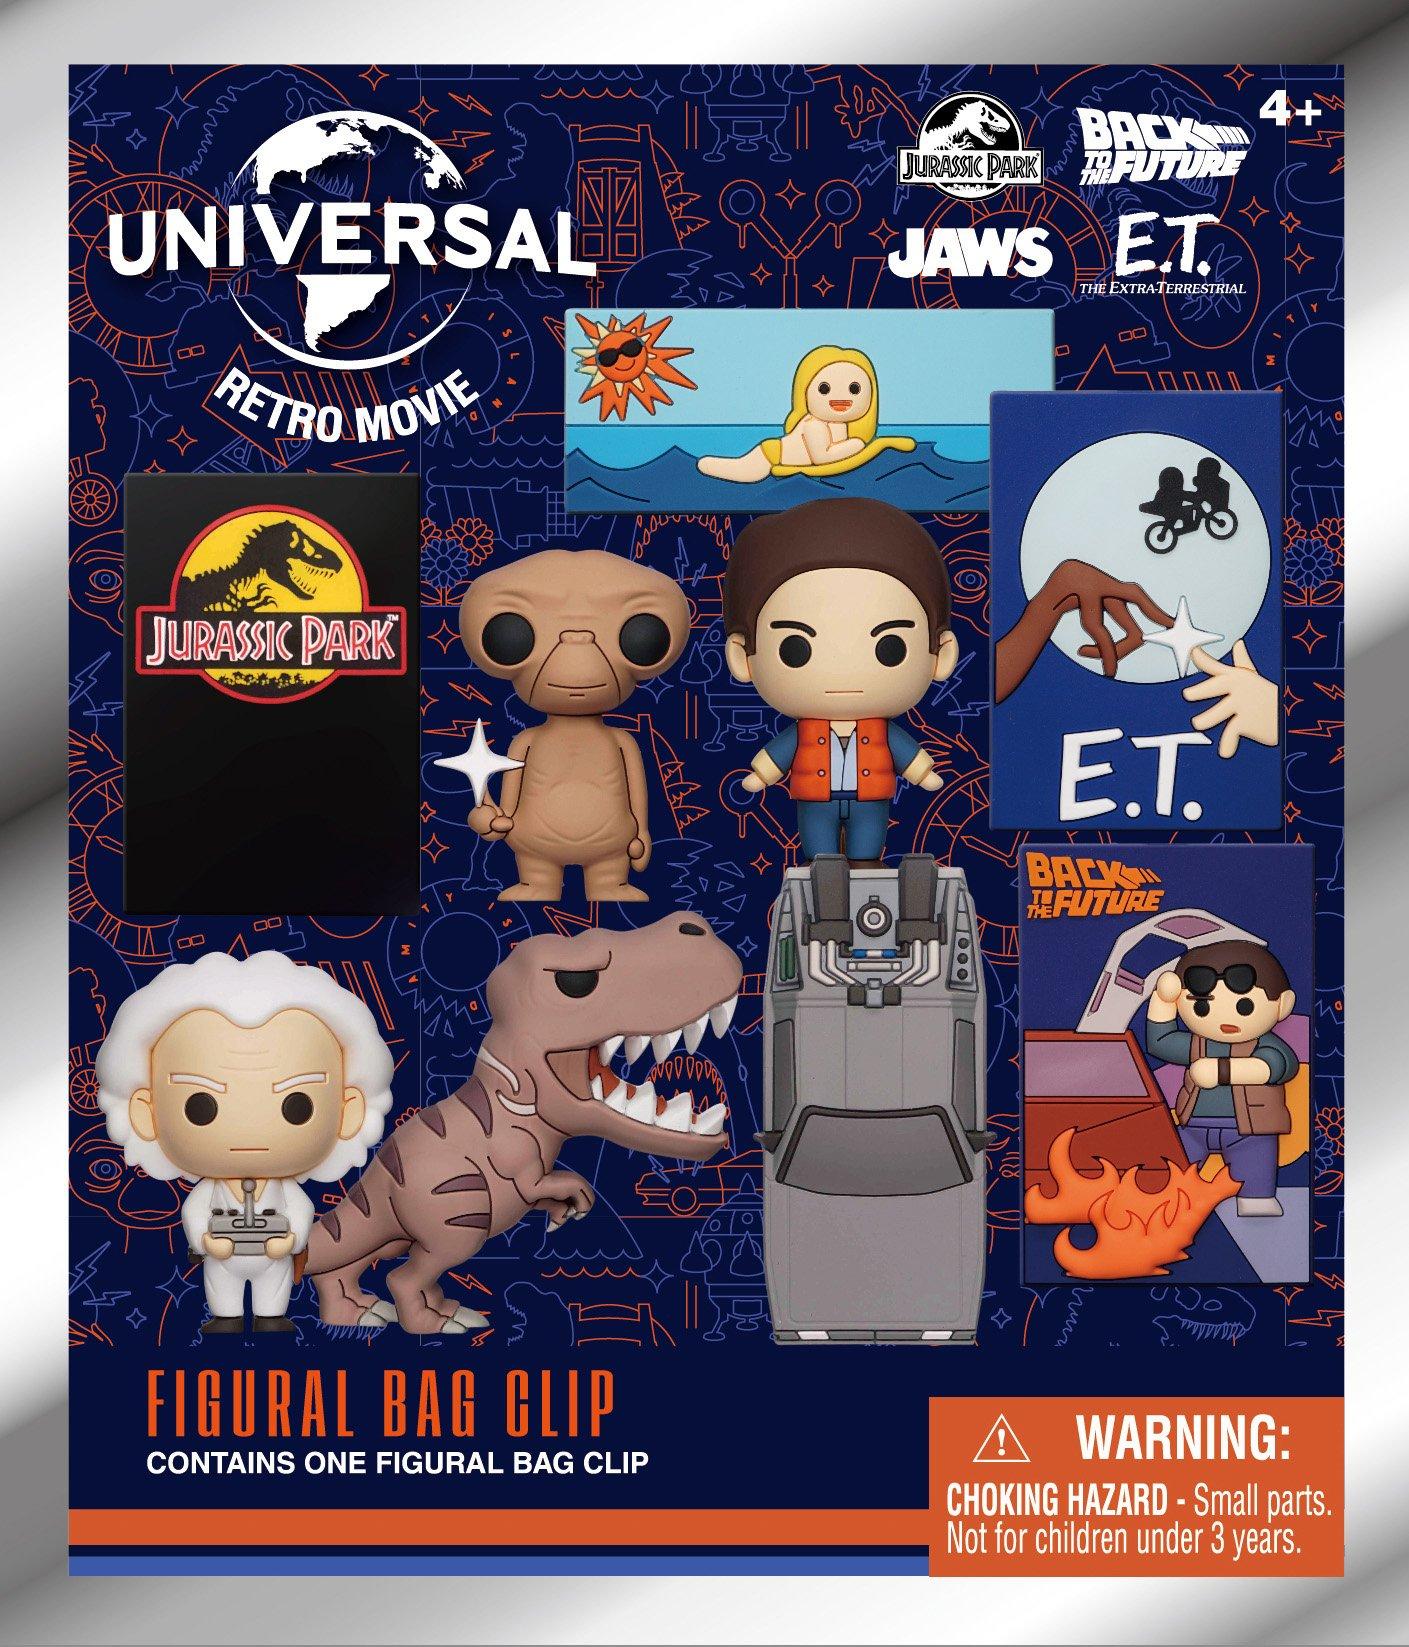 Universal Retro Movies E.T. the Extra-Terrestrial, Back to the Future,  Jaws, Jurassic Park 3D Foam Bag Clip Blind Bag